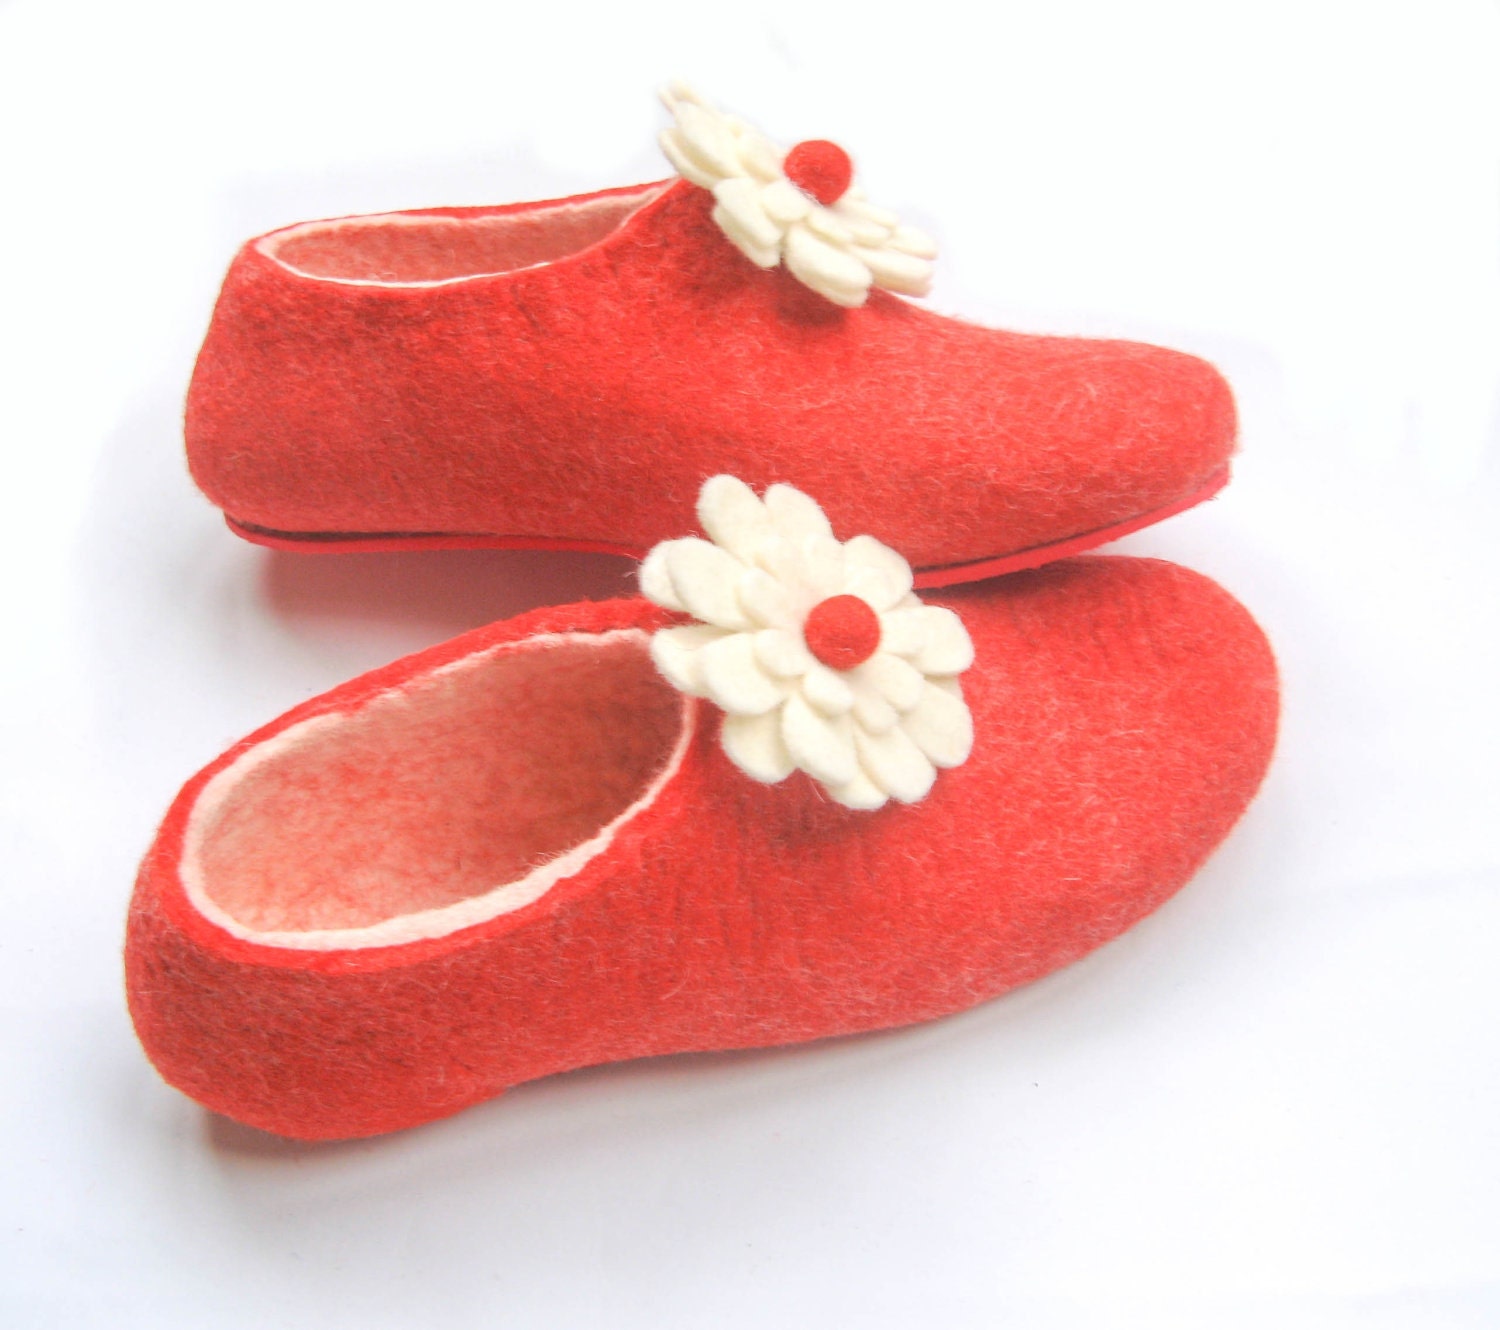 Felted Wool Slippers, Wool Boots, Cat Beds: Yummy Wild Strawberries ...